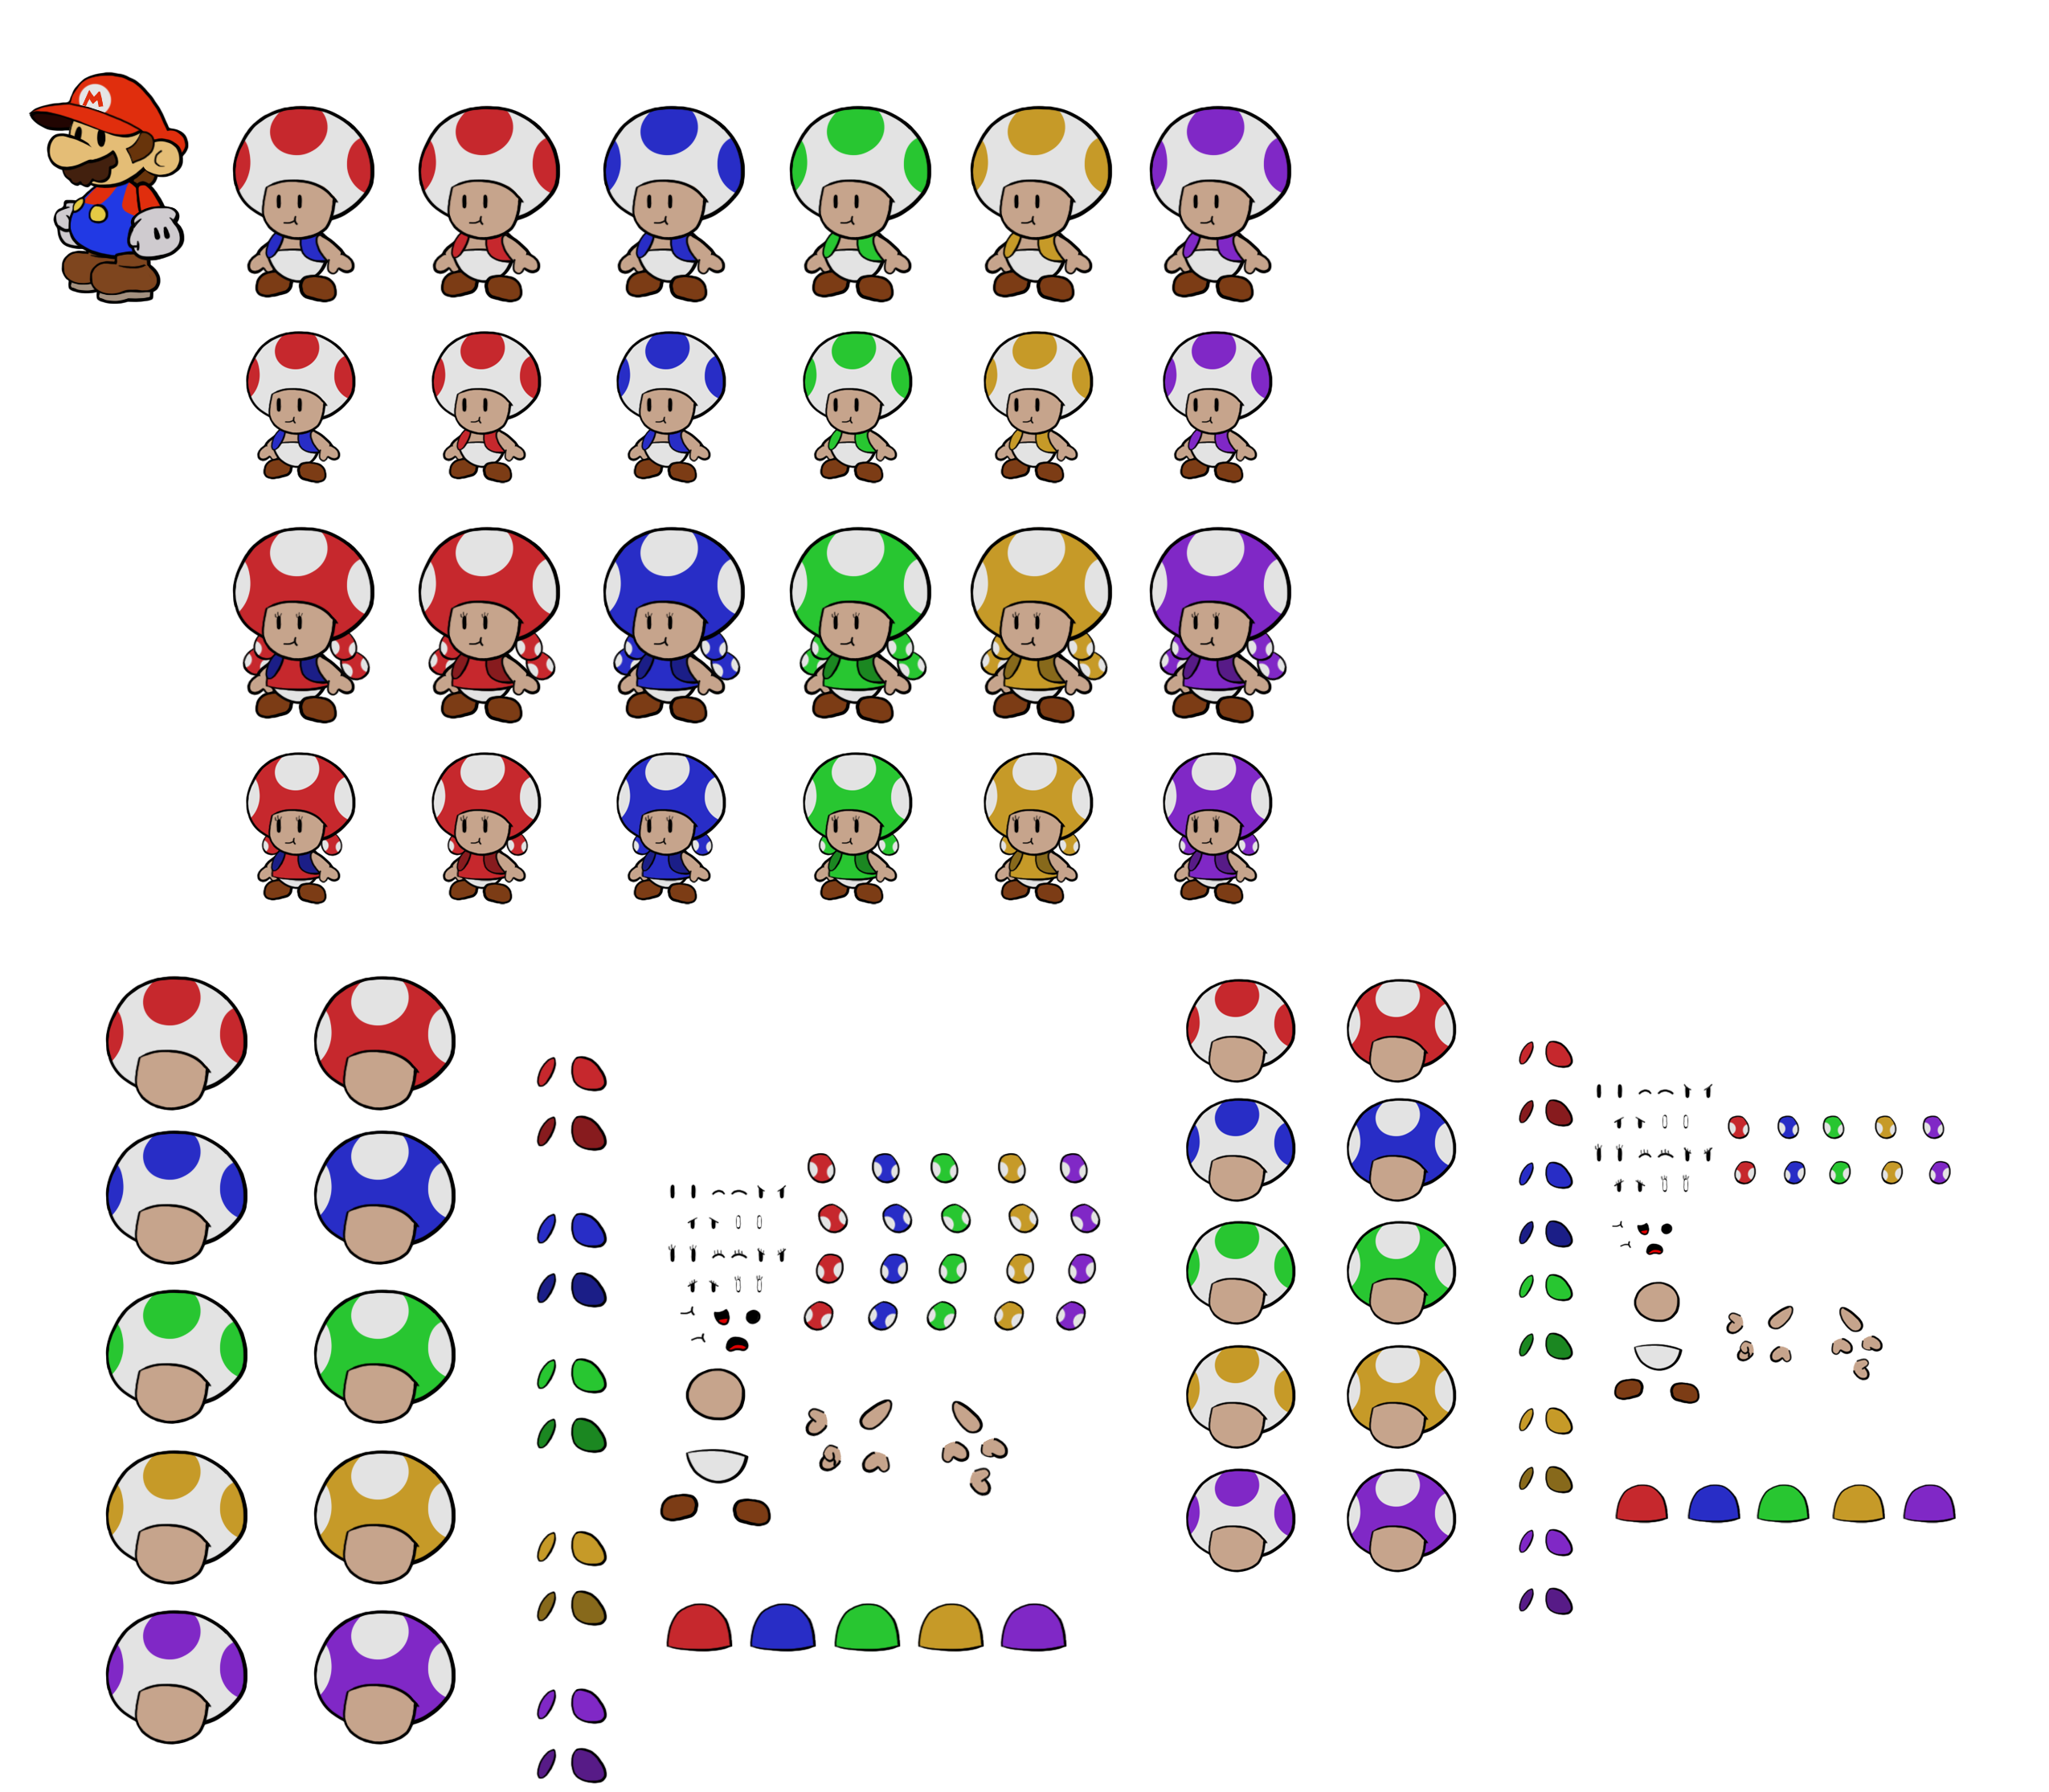 Toads & Toadettes (Paper Mario-Style)